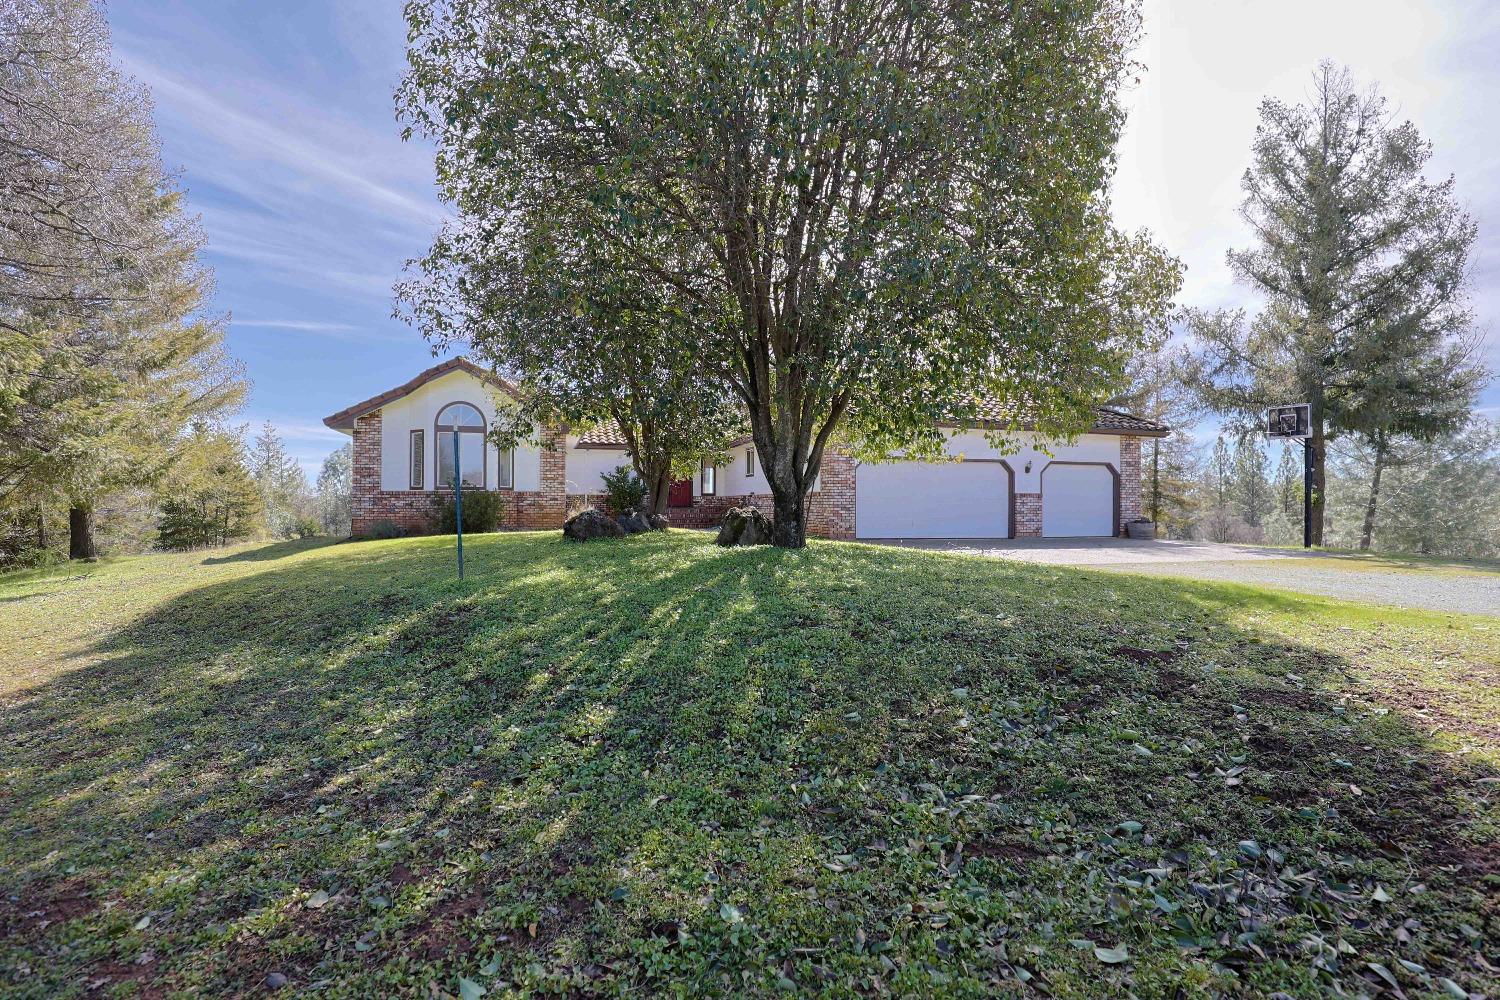 1100 Sevier Road, Cool, CA 95614